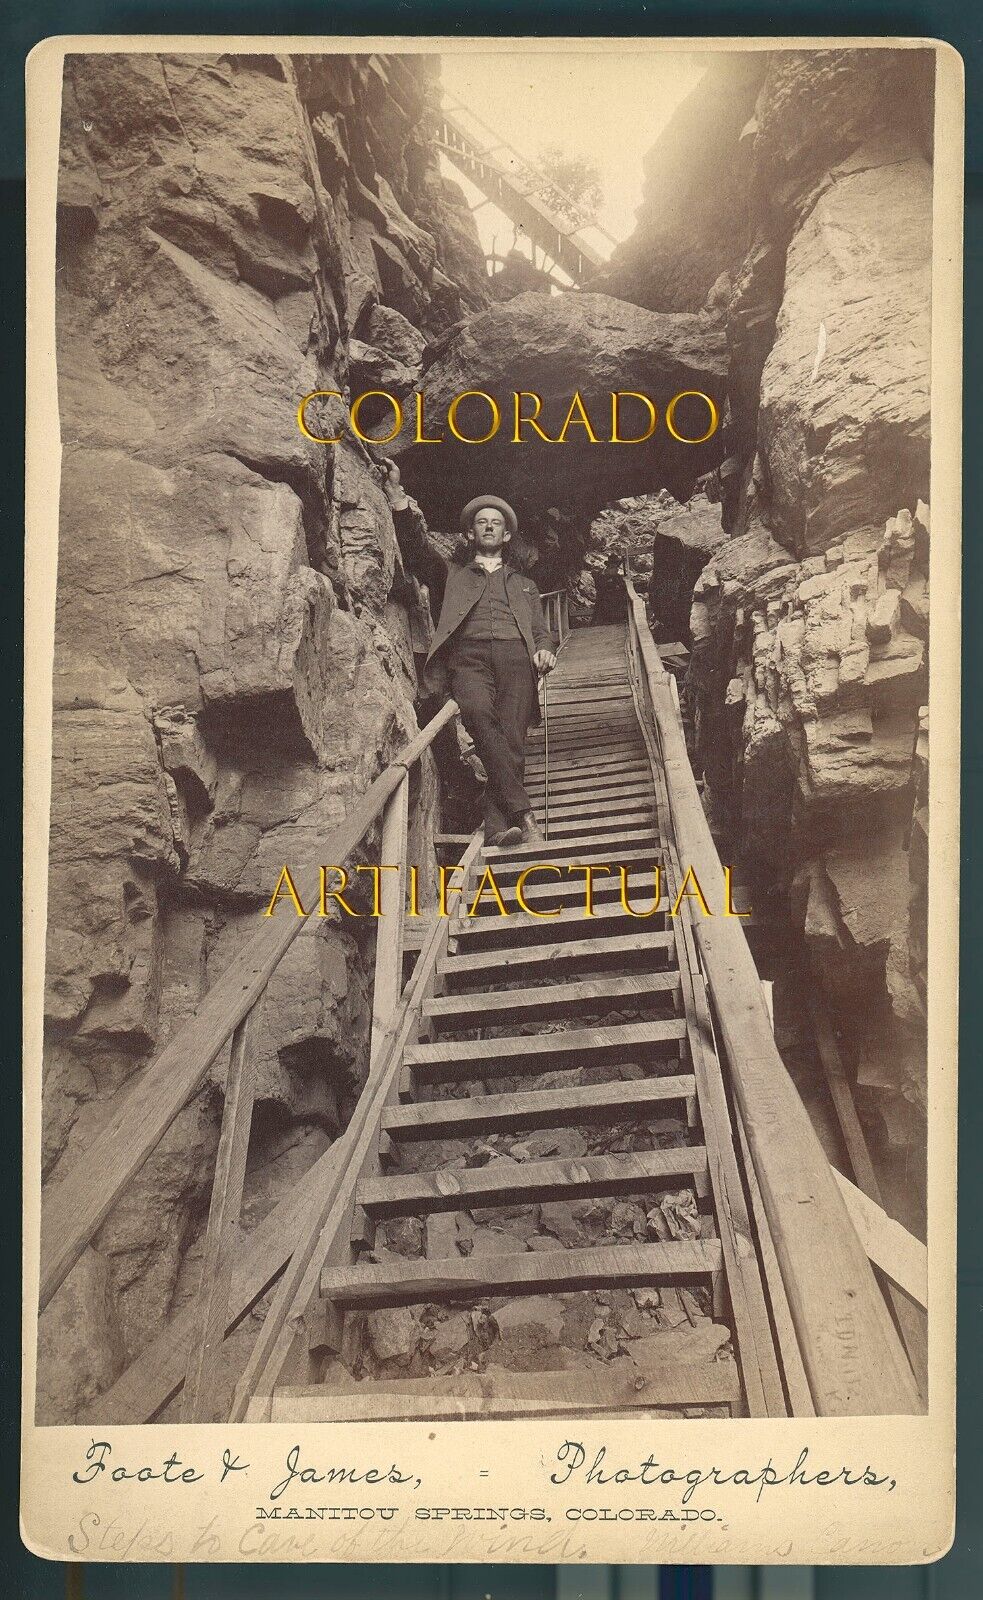 CAVE OF THE WINDS COLORADO stairway to entrance #170 Foote & James photo 1890